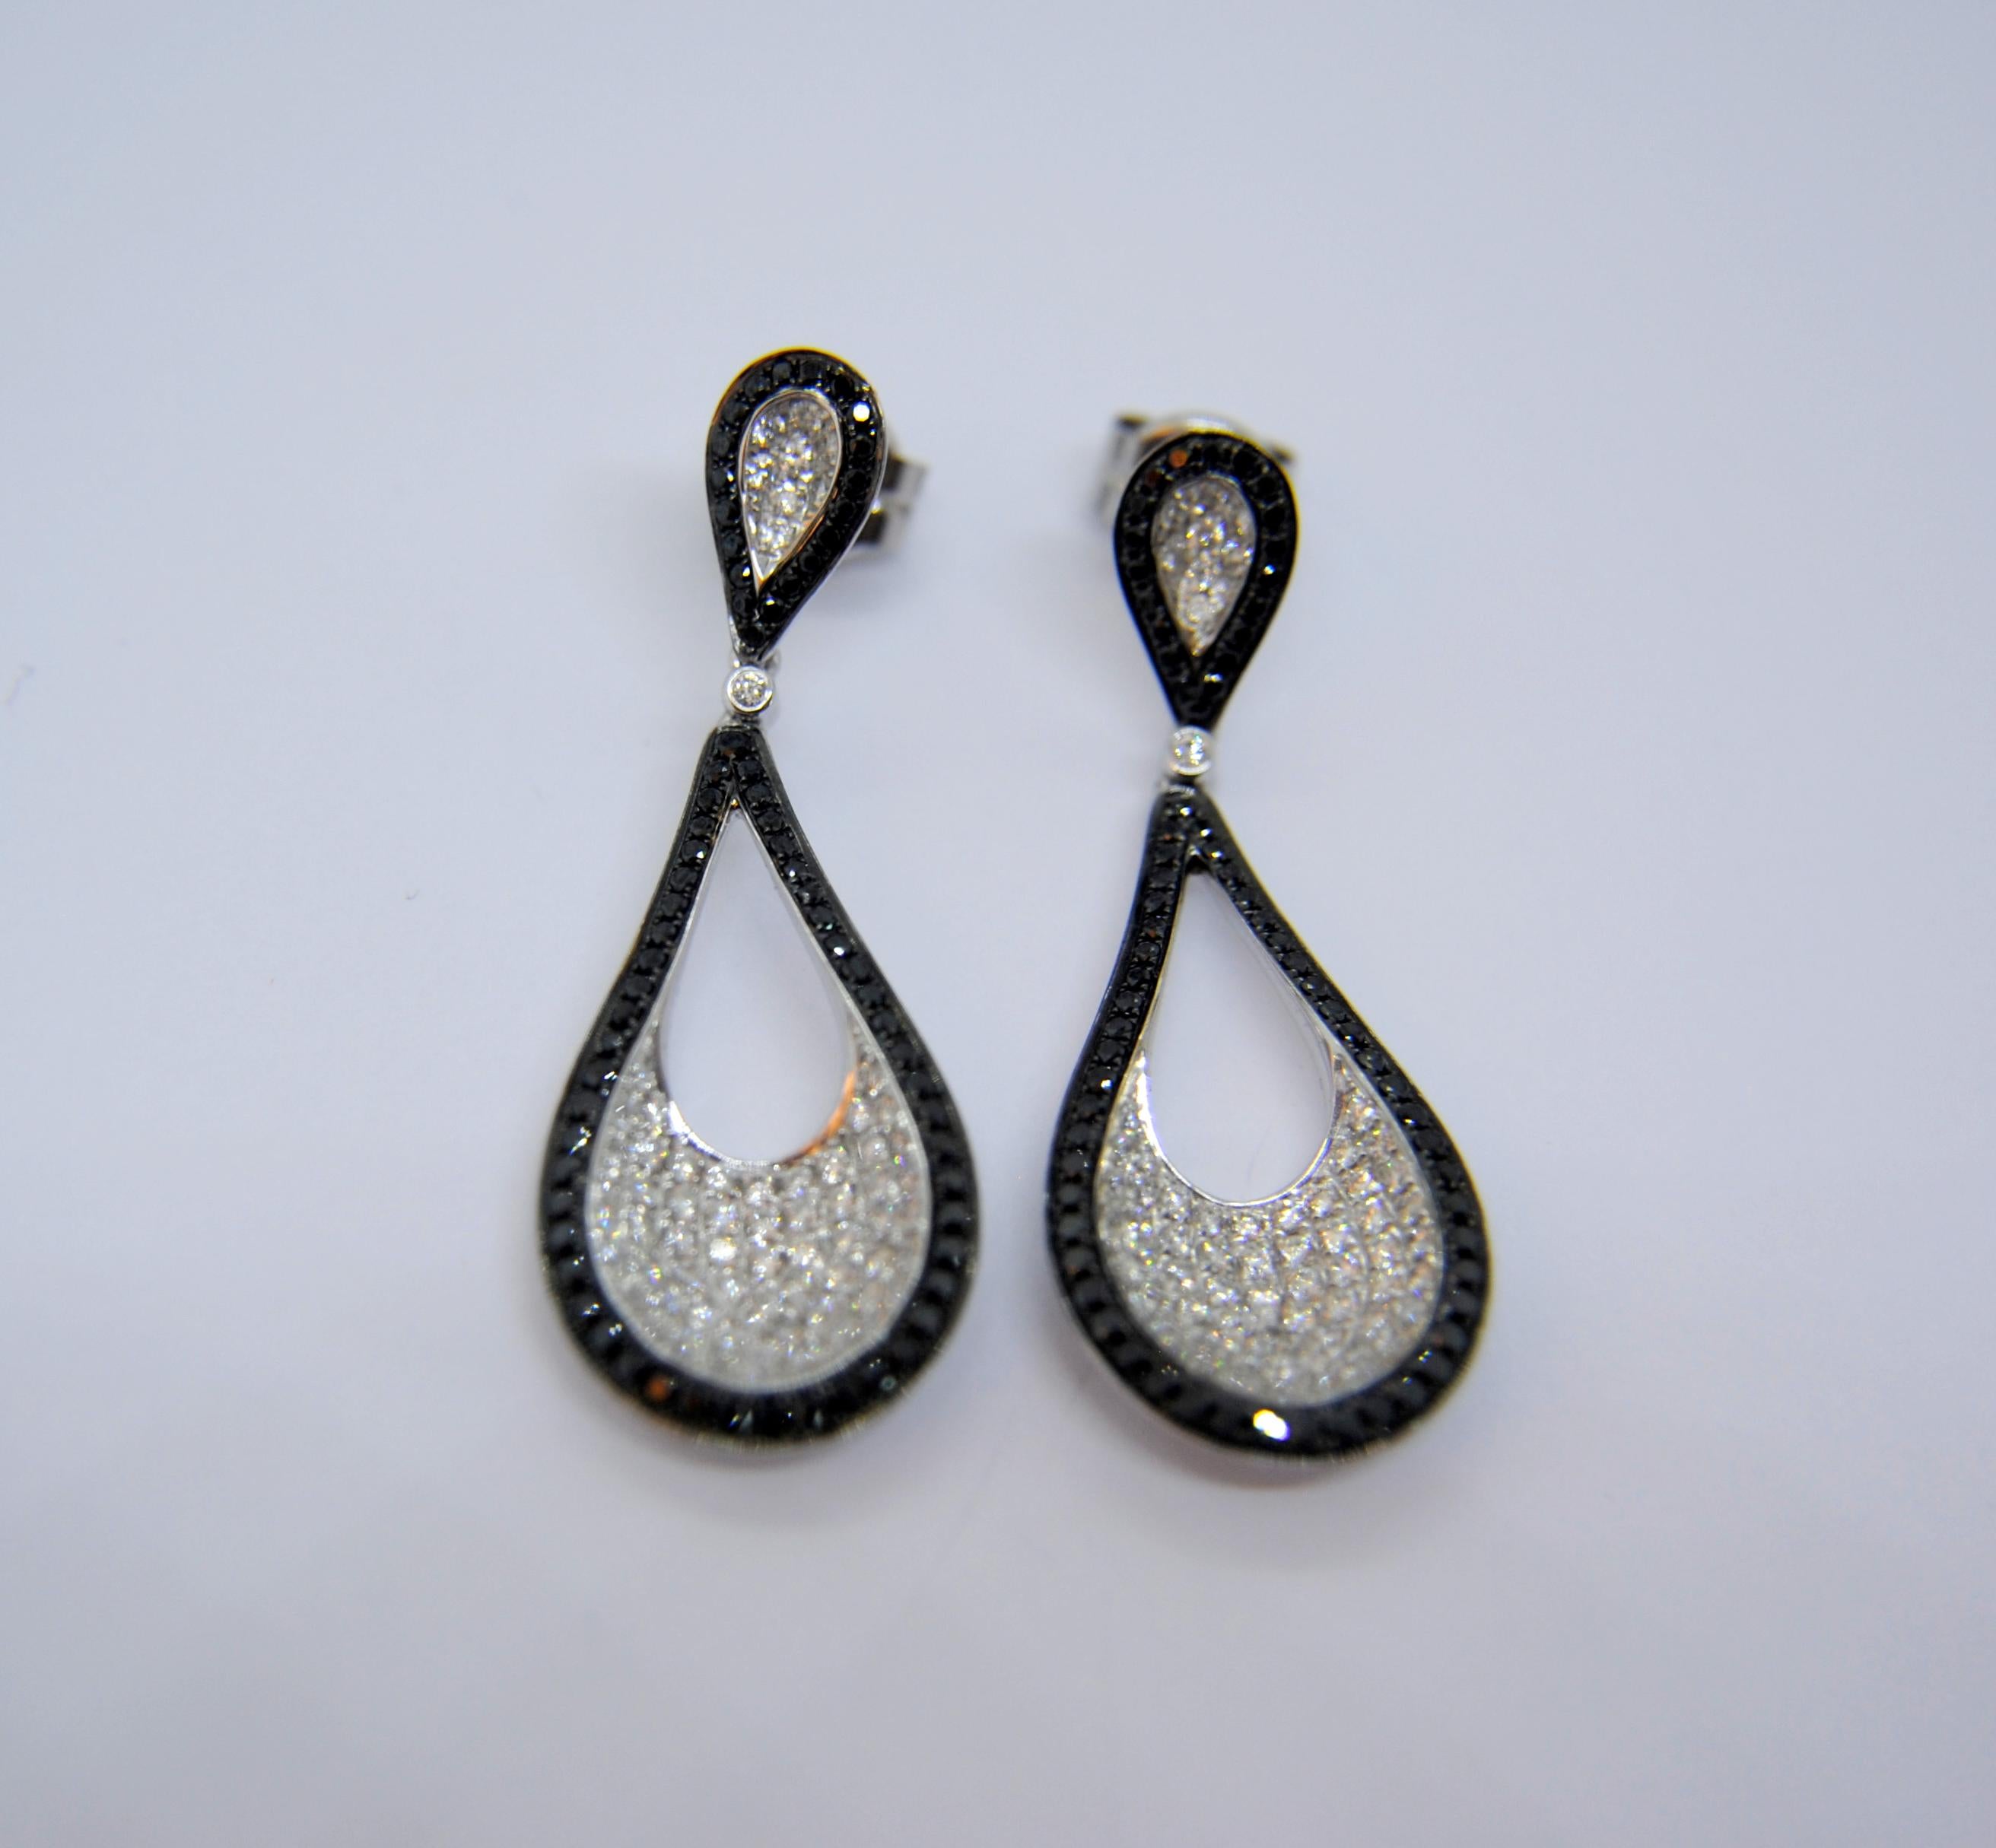 READY TO SHIP
*Shipment of this piece is not affected by COVID-19. 
Orders welcome!*
These pair of 18k white gold dangle earrings weight 8.6grams and measure 40mm or 1.50 inches
The pavé of black diamonds that surround the drops are 84 x 0,005ct